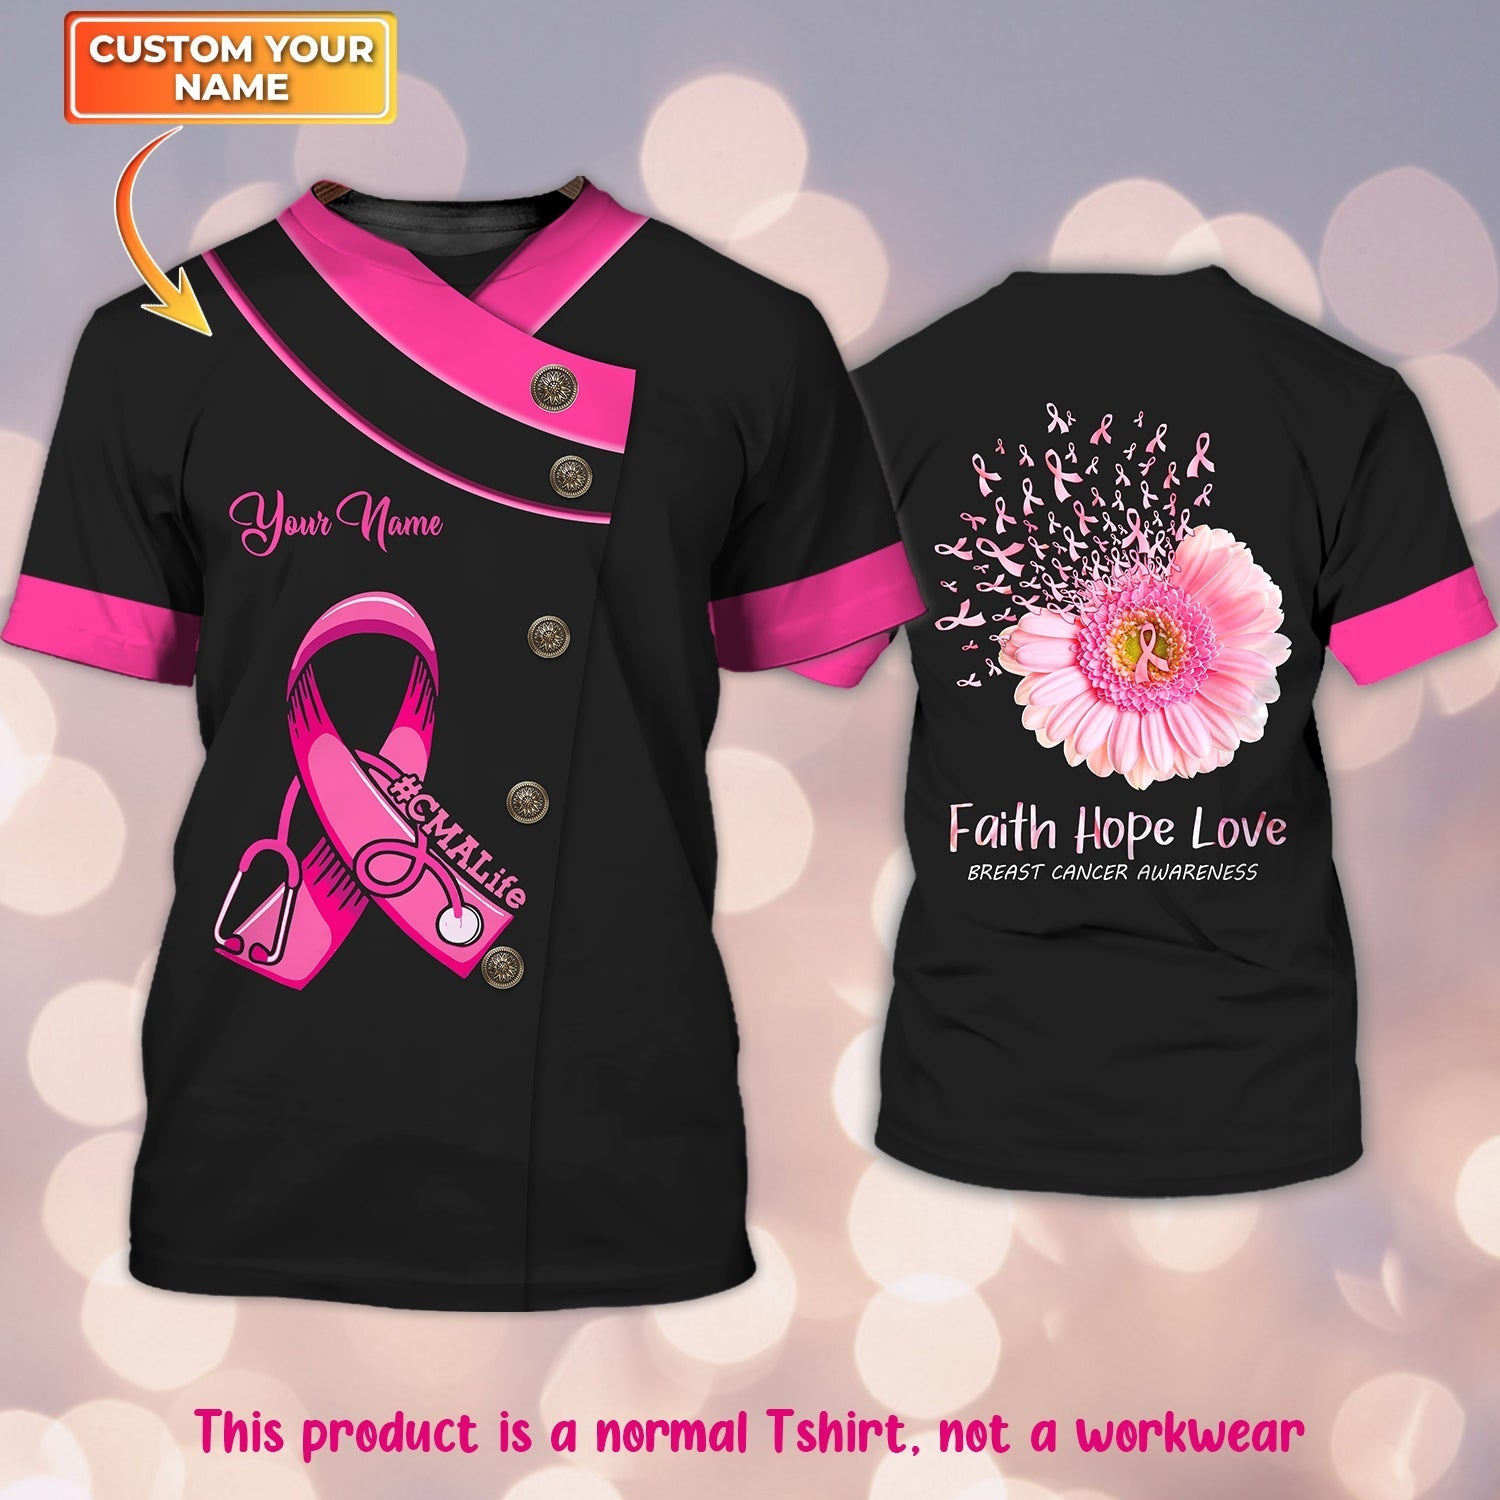 Cmalife Breast Cancer Awareness Personalized 3D Shirt Tad (Non Workwear)